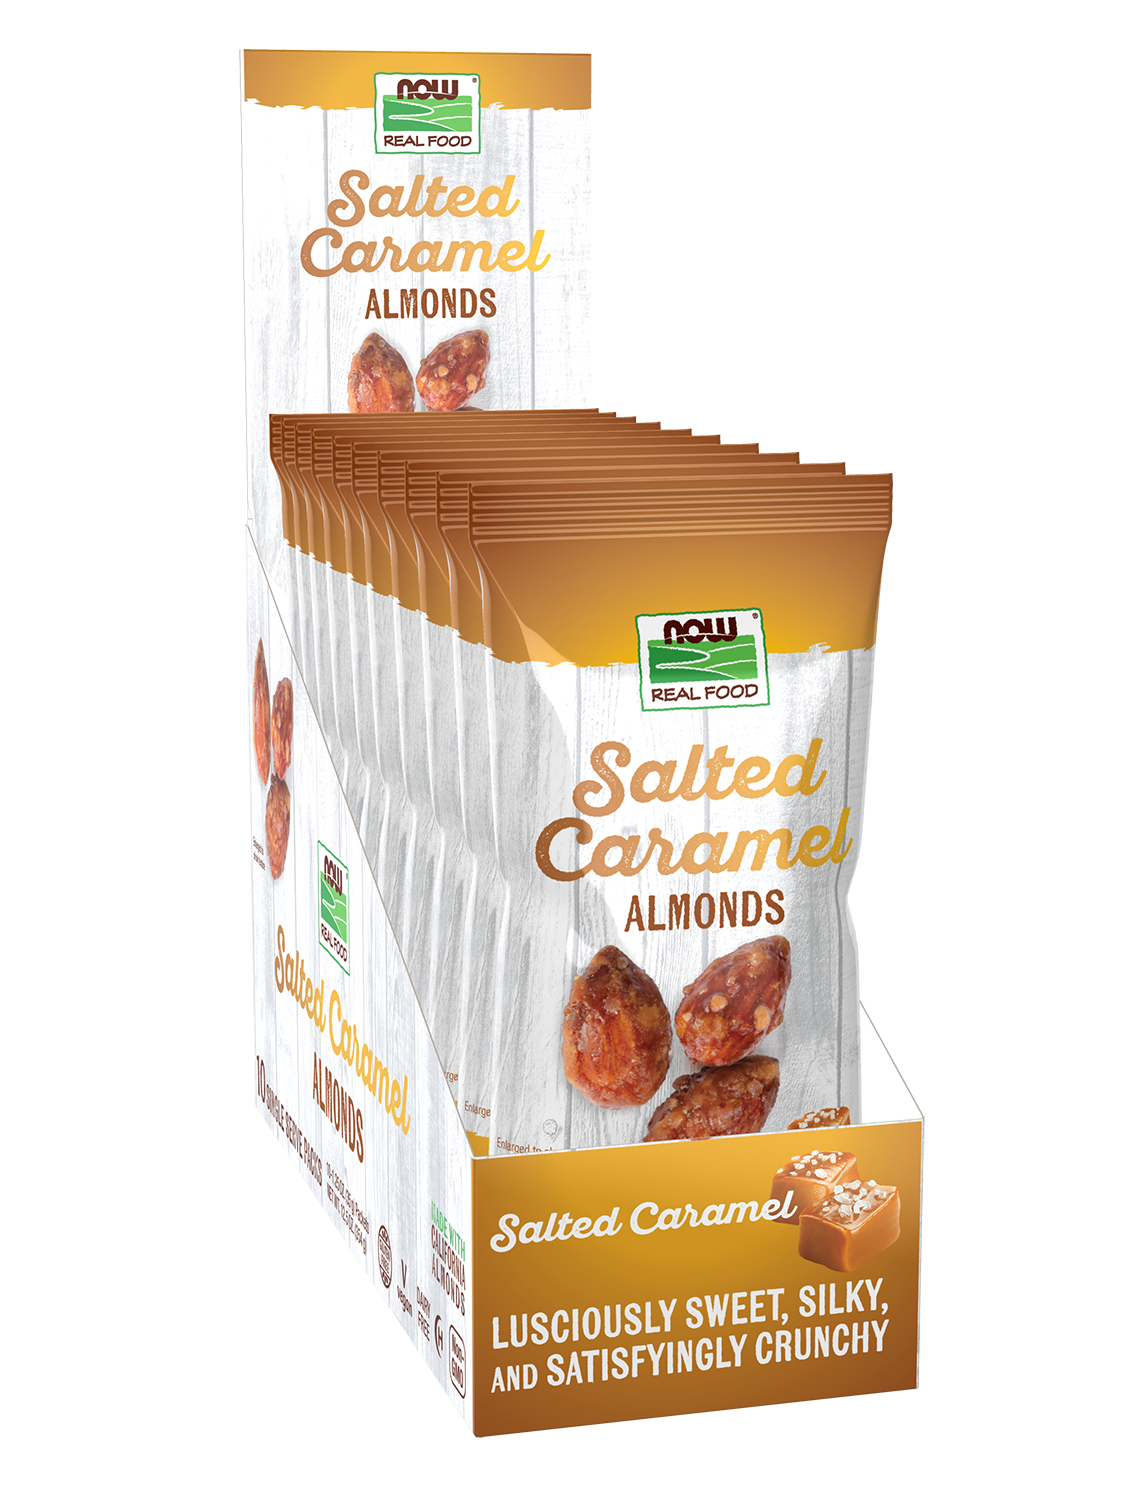 Almonds, Salted Caramel - 10 - 1.25 oz.(35g) Packets In Box Front